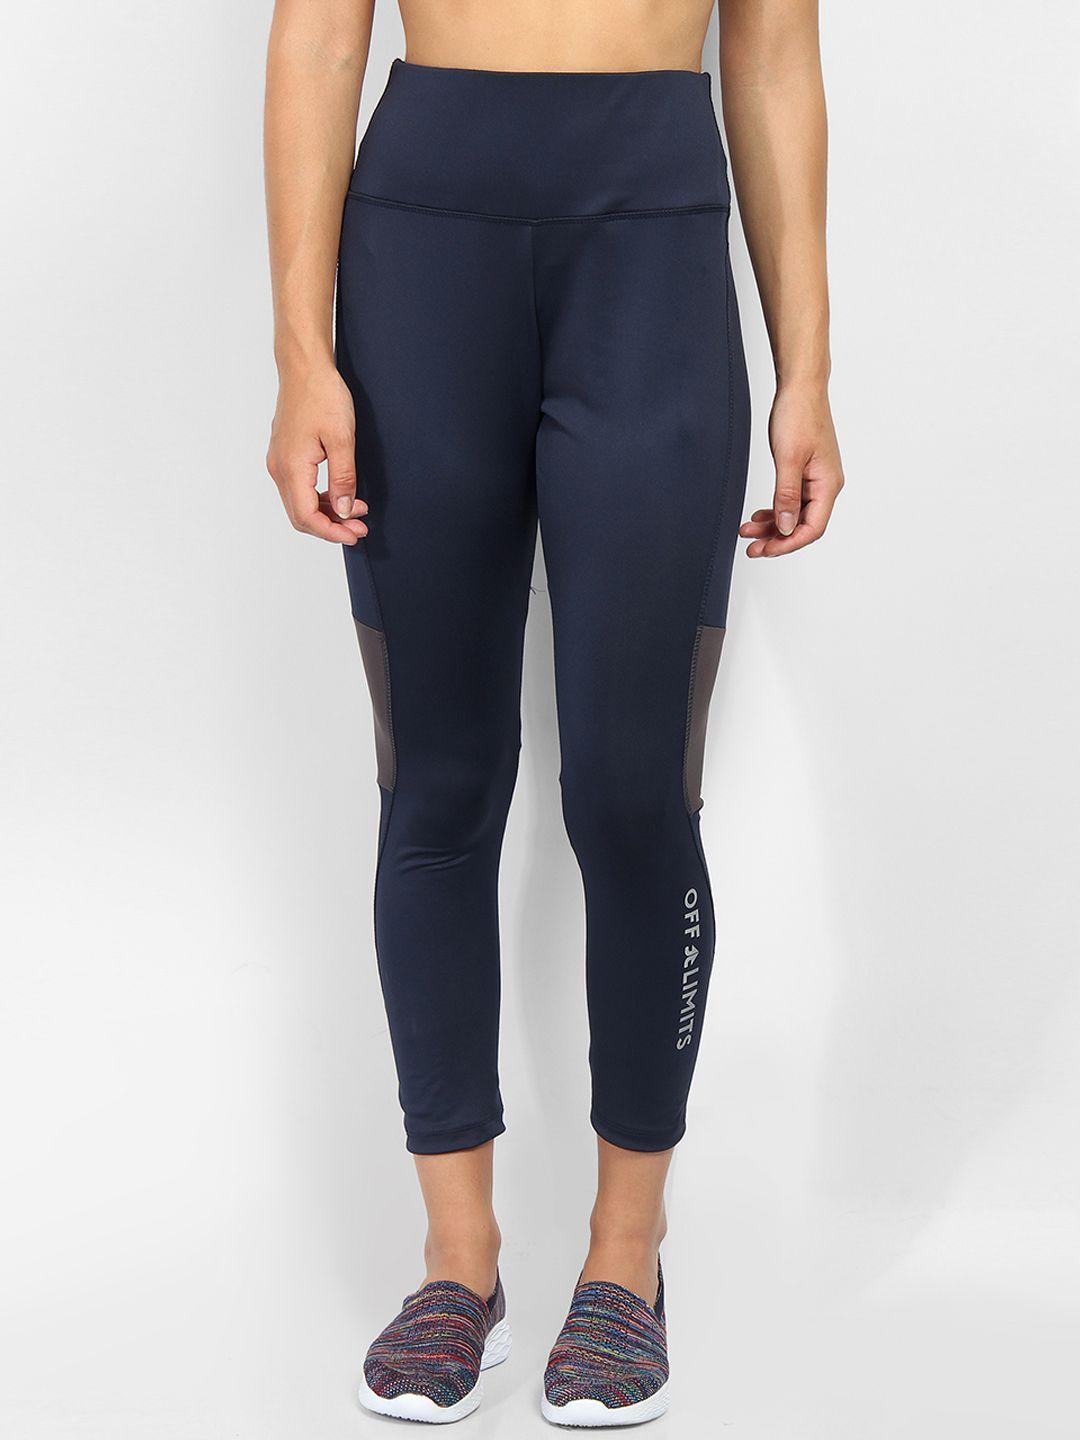 off limits women navy blue colourblocked workout tights